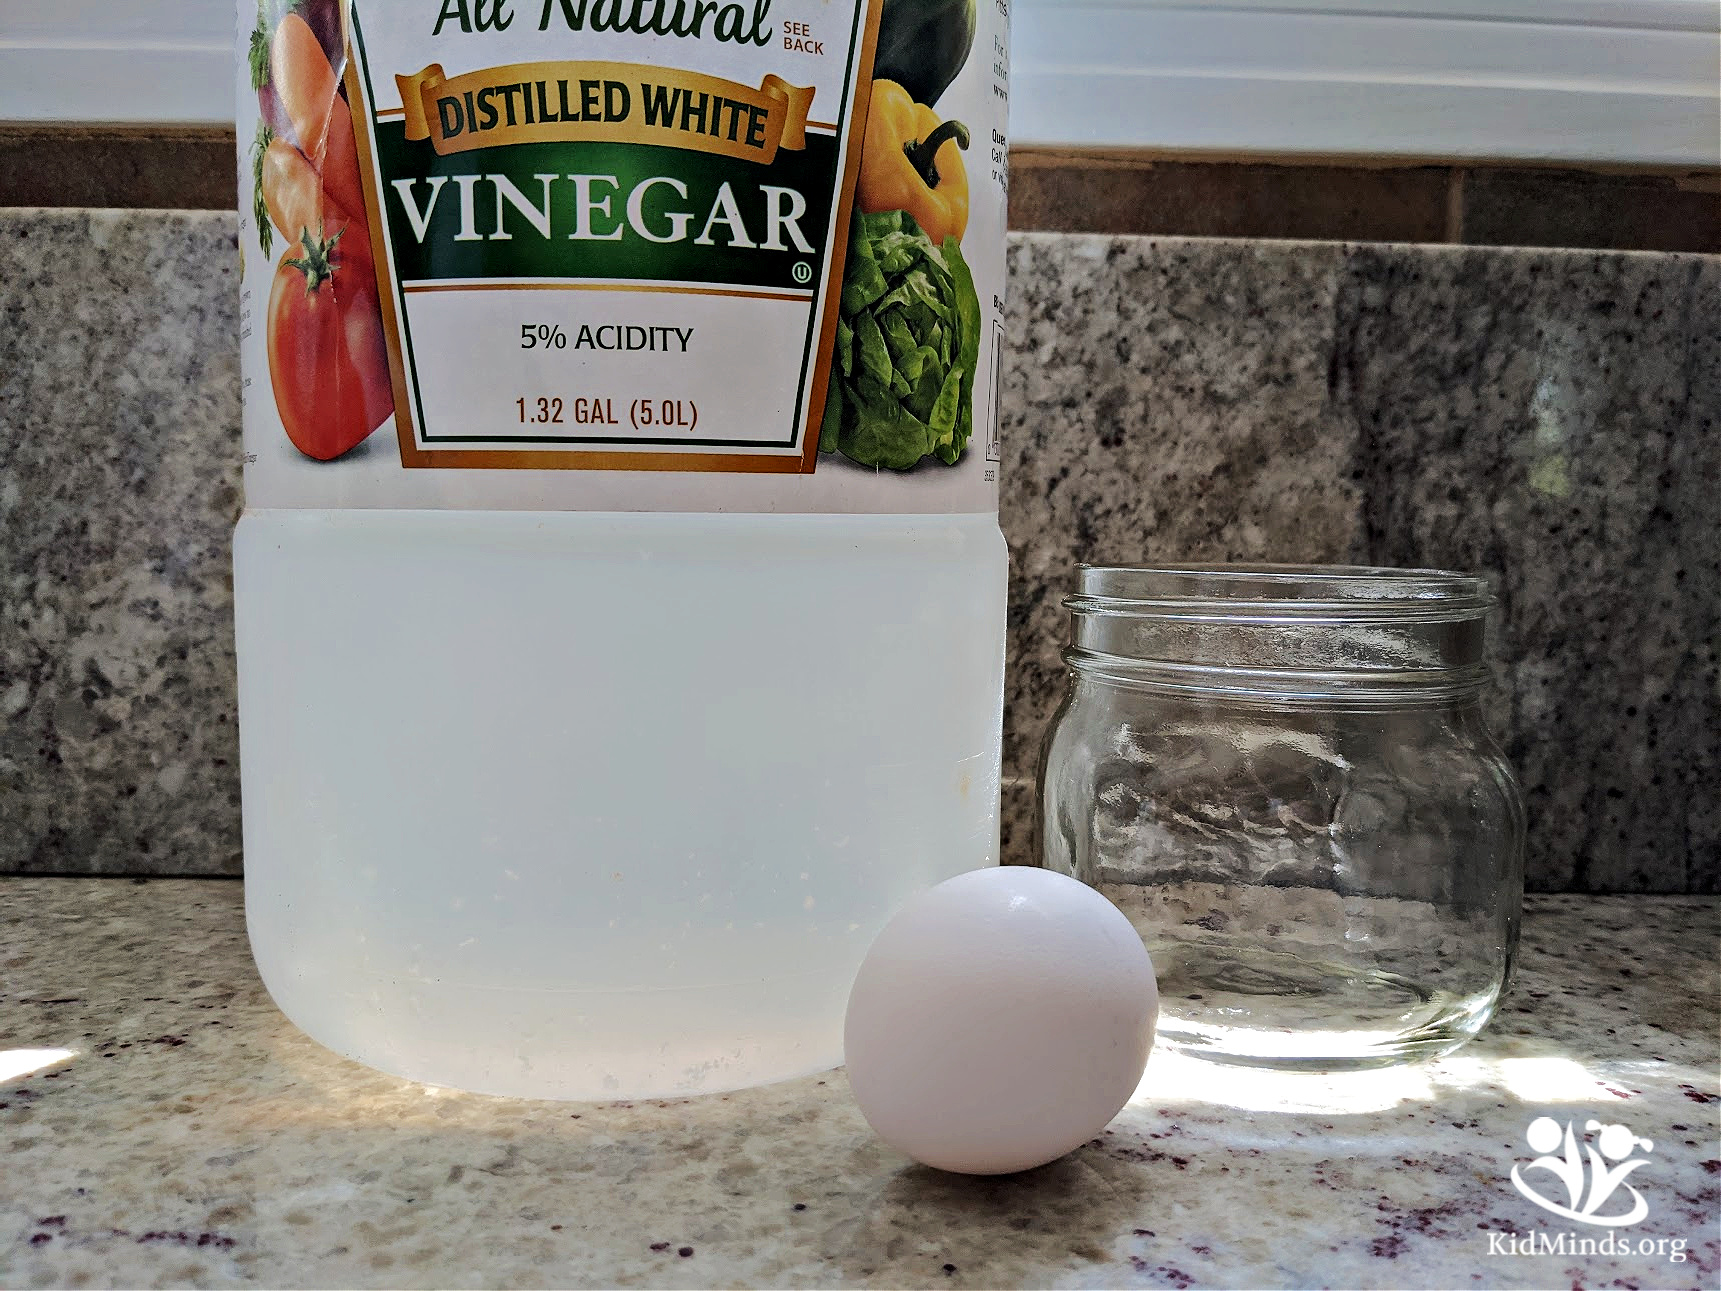 Whether you’re looking for an easy #science activity, a spring-themed #experiment, some kitchen science, a hands-on #egg exploration, or a kid-friendly introduction to #chemistry, this one is for you!  #handsonlearning #kidsactivities #STEAM #calcium